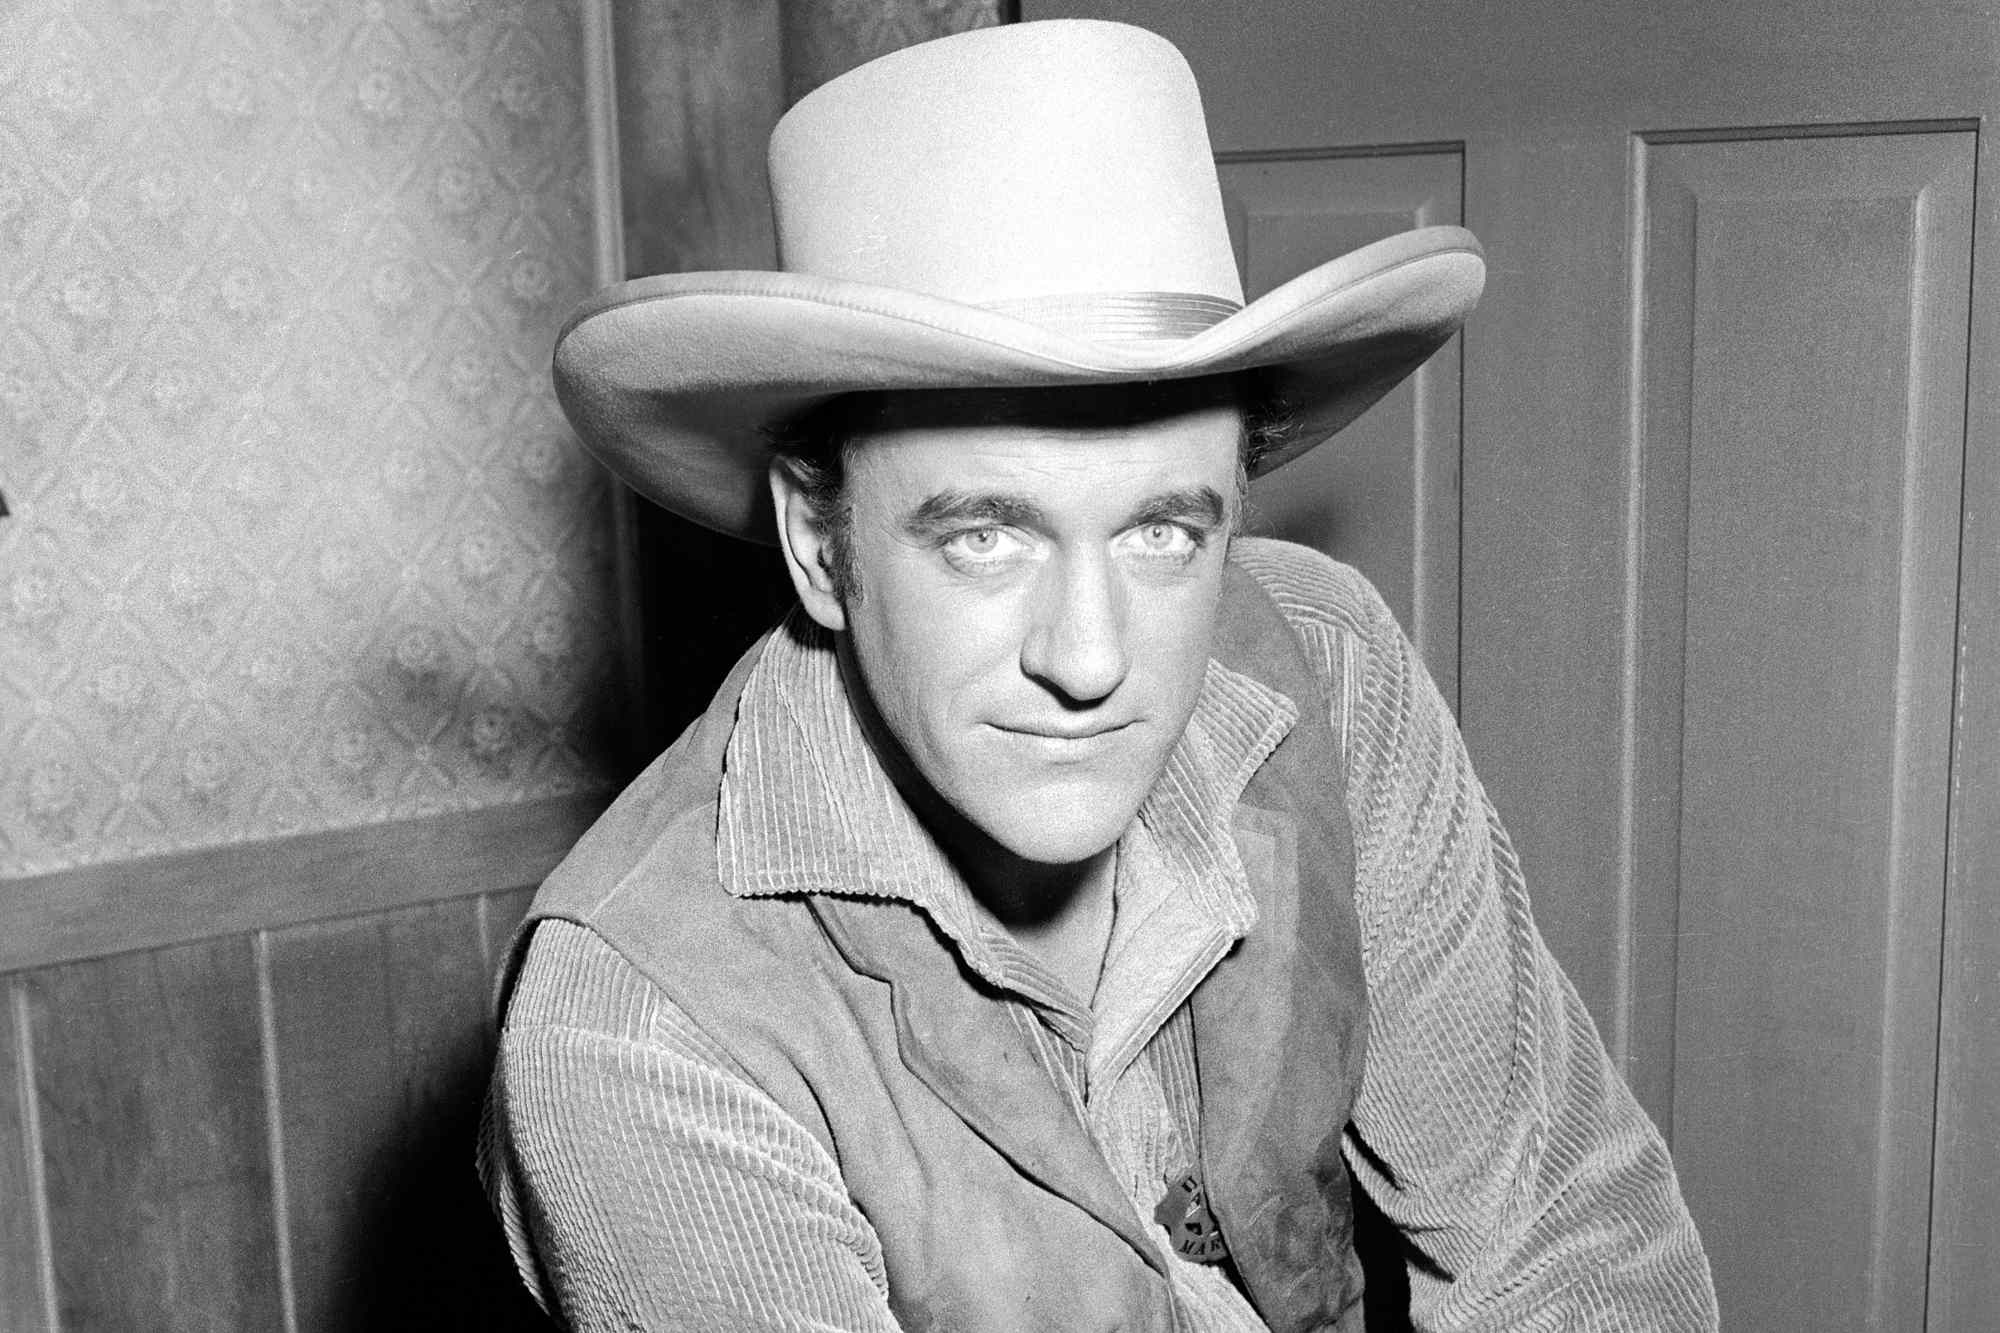 'Gunsmoke' episodes James Arness as Matt Dillon looking at the camera in a black-and-white picture, wearing a Western costume.